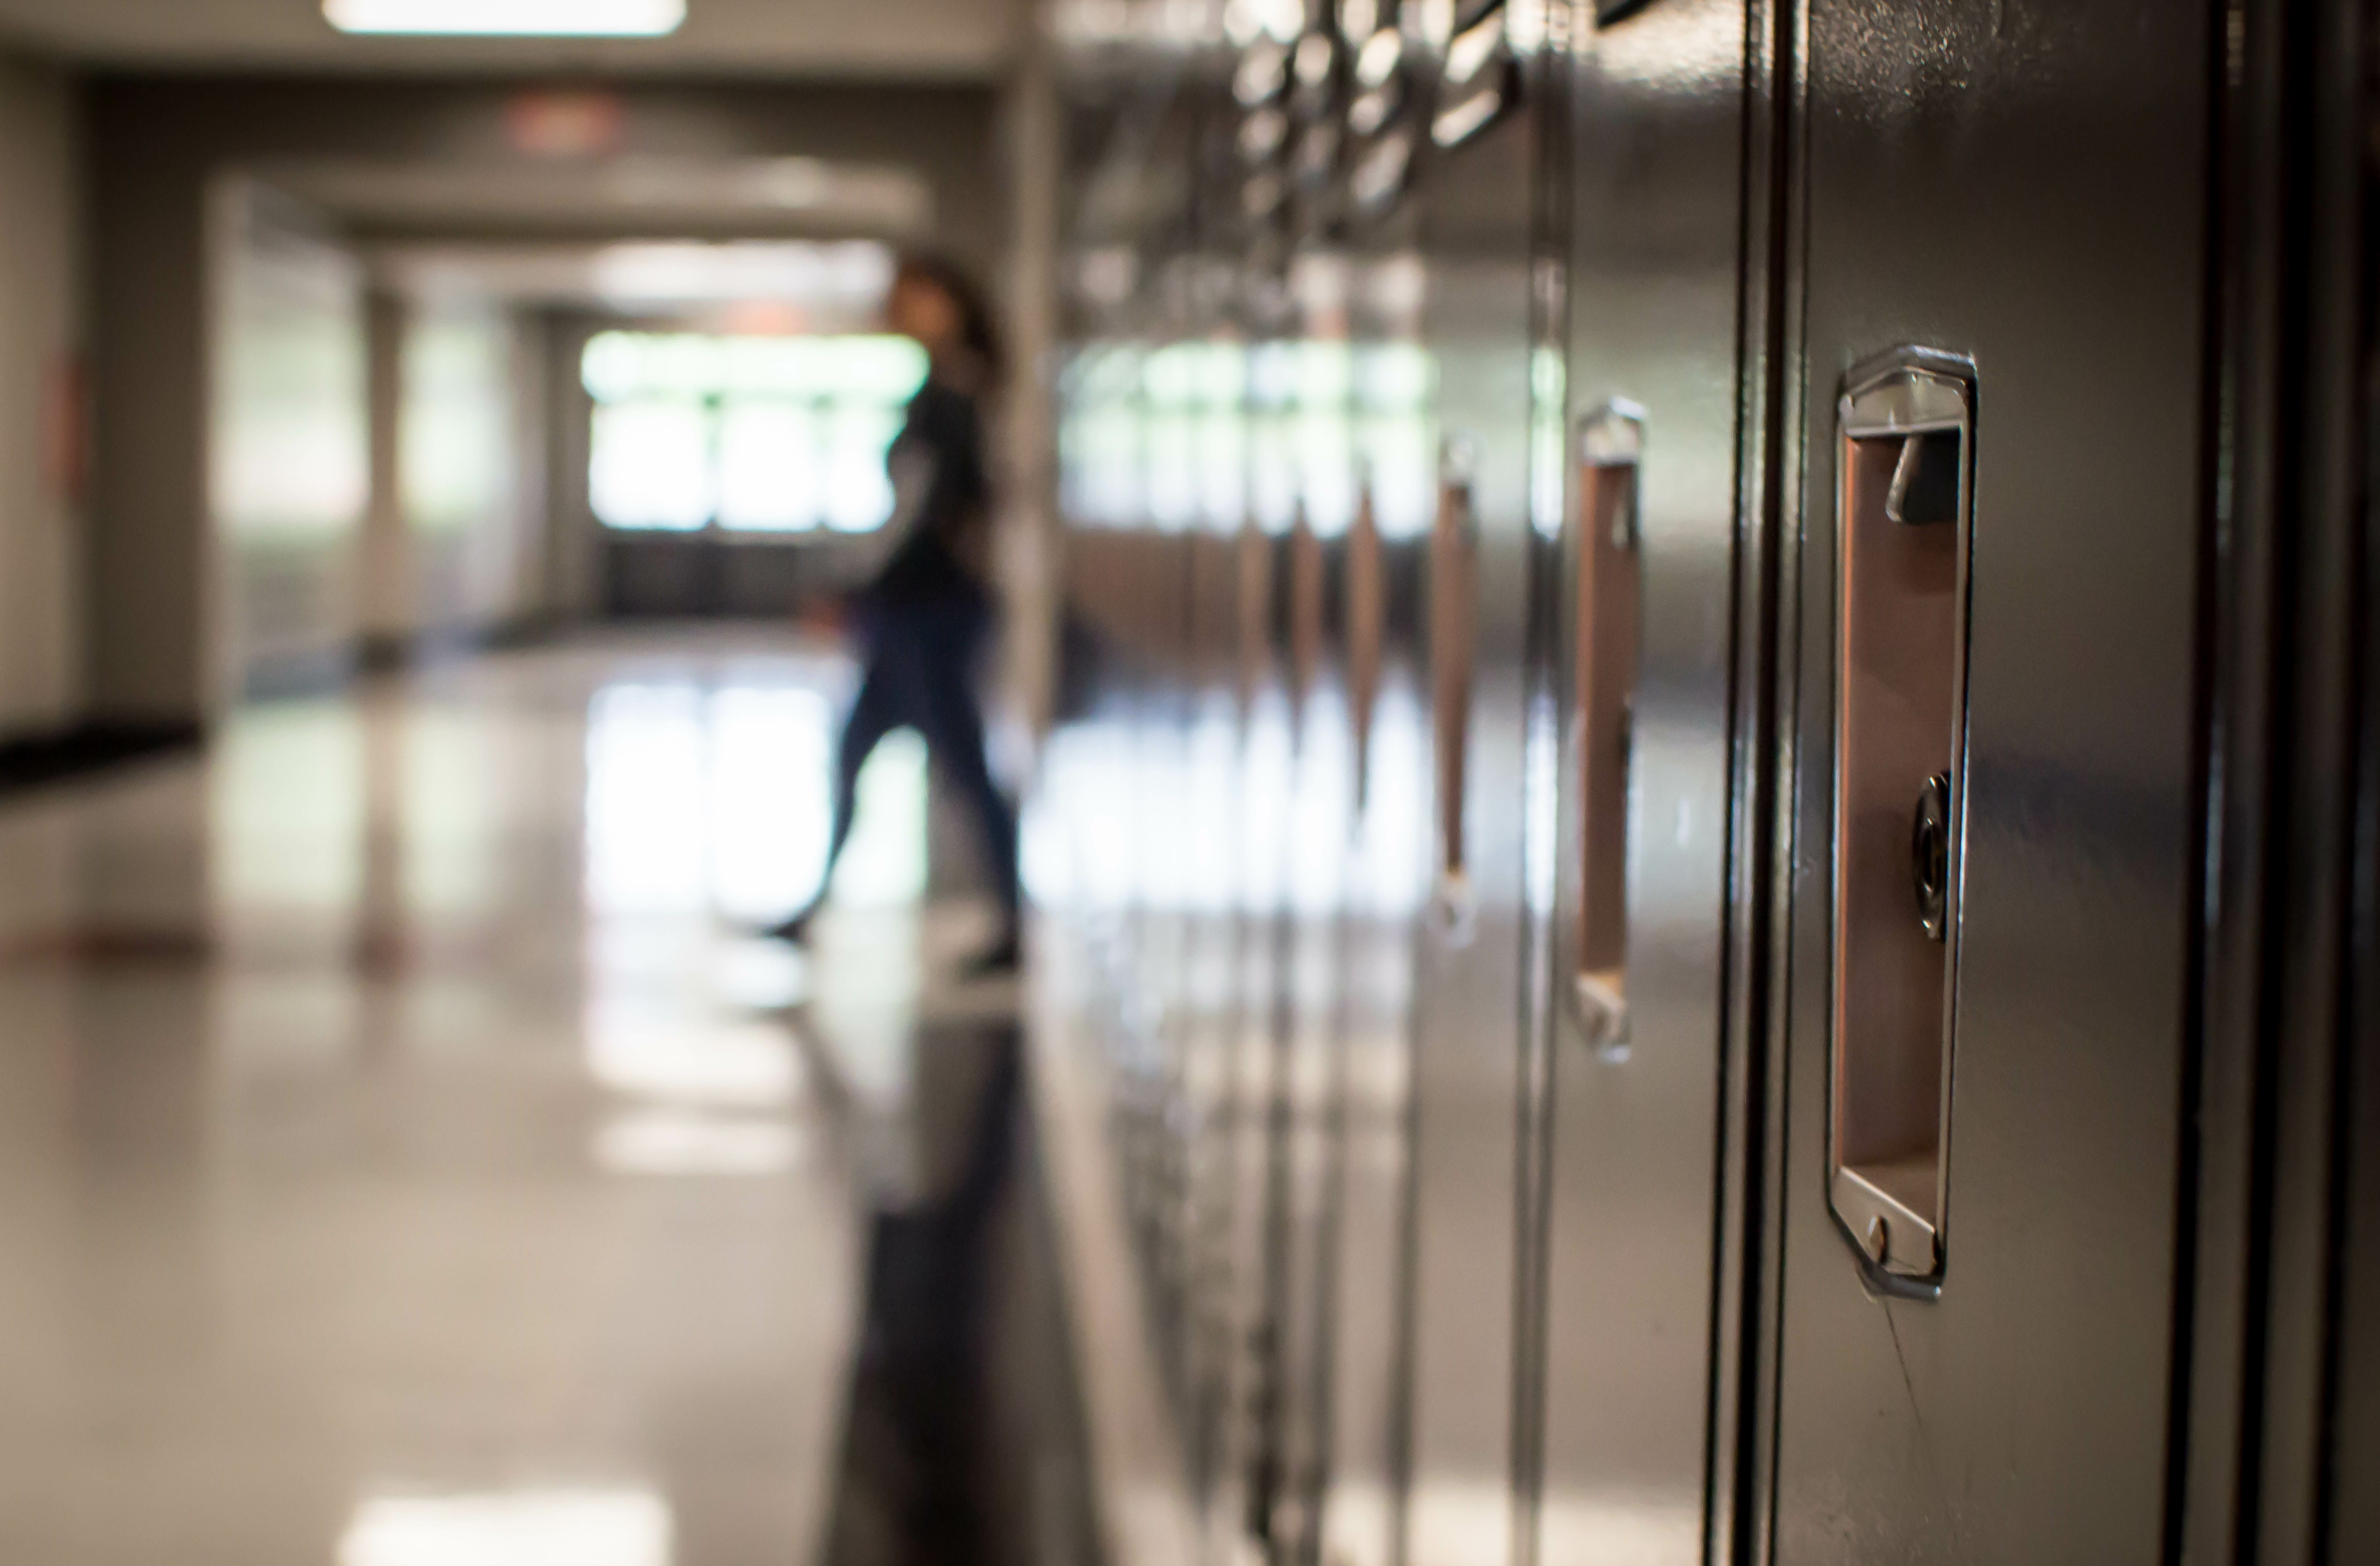 4 security tactics you should take as schools reopen